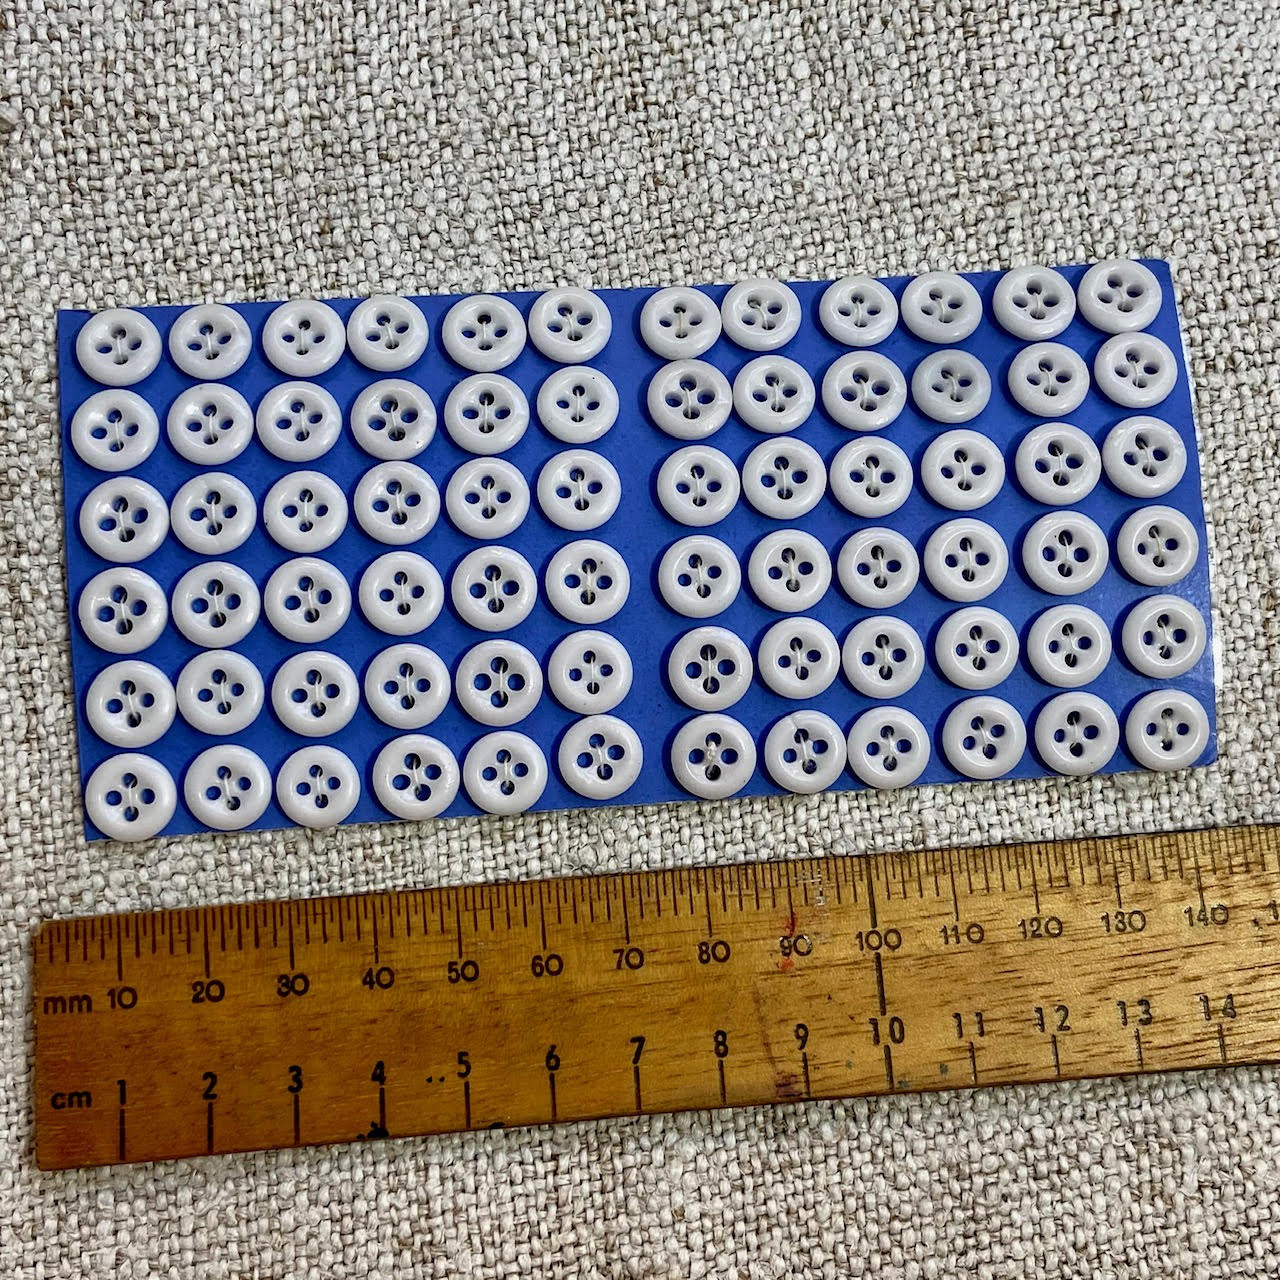 White Milk Glass Buttons - Item 23576